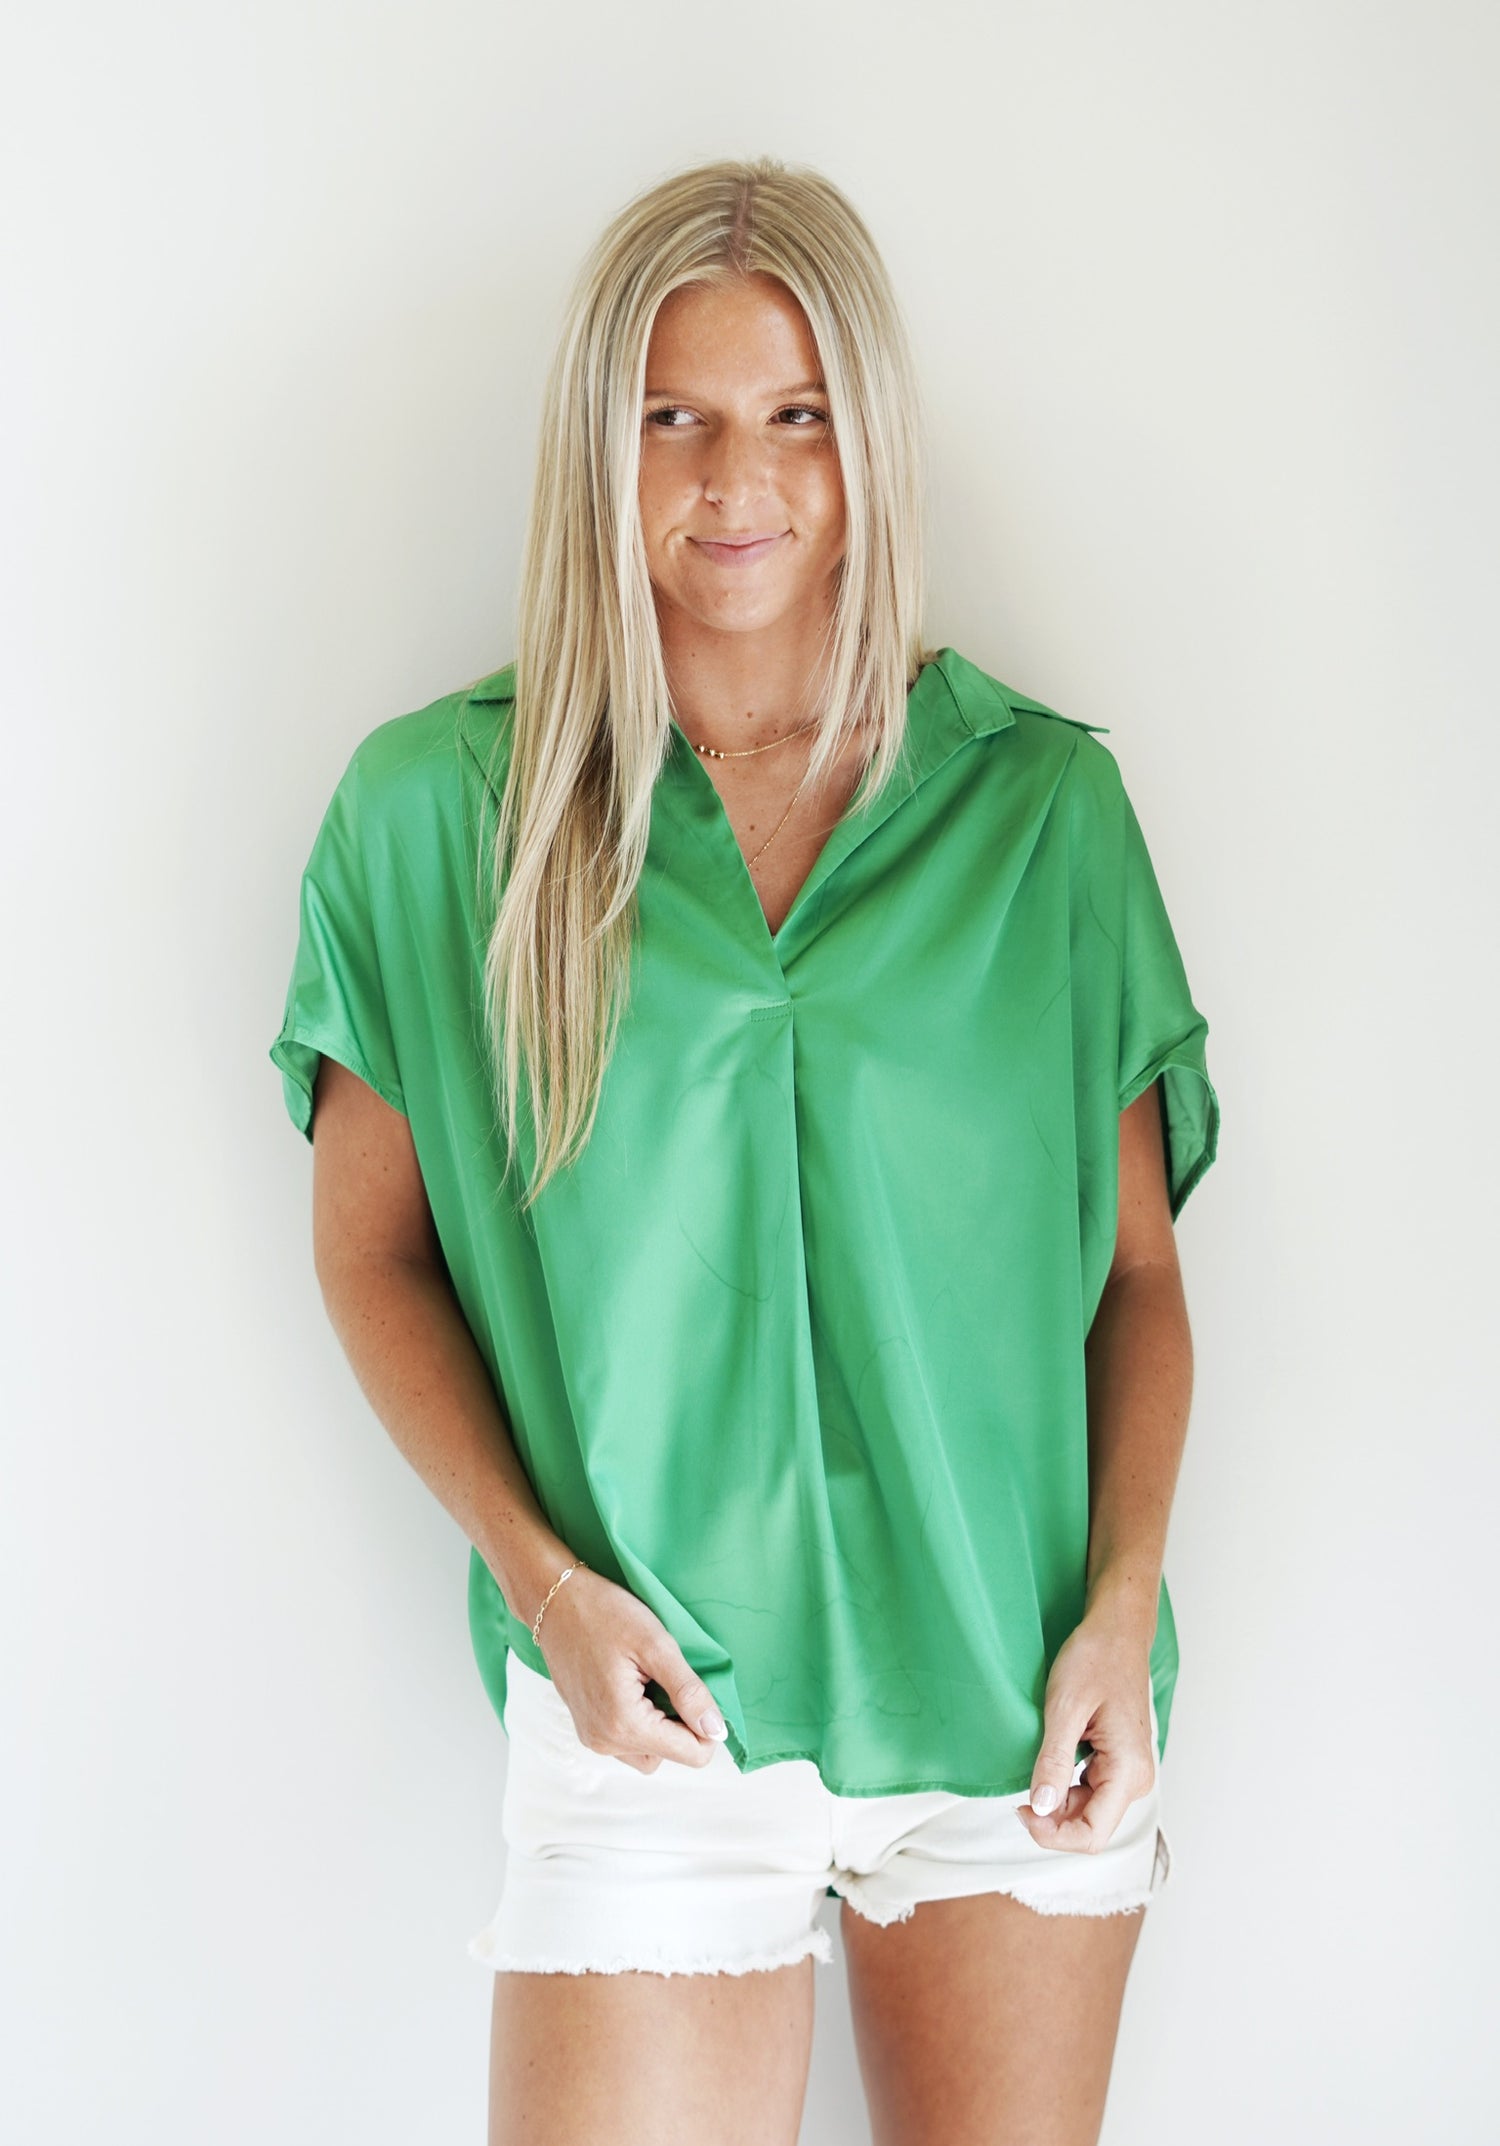 Celia Satin Collared Blouse Collared Neckline Short Cap Sleeve  Satin Material Green Color Loose Fit Full Length 100% Polyester